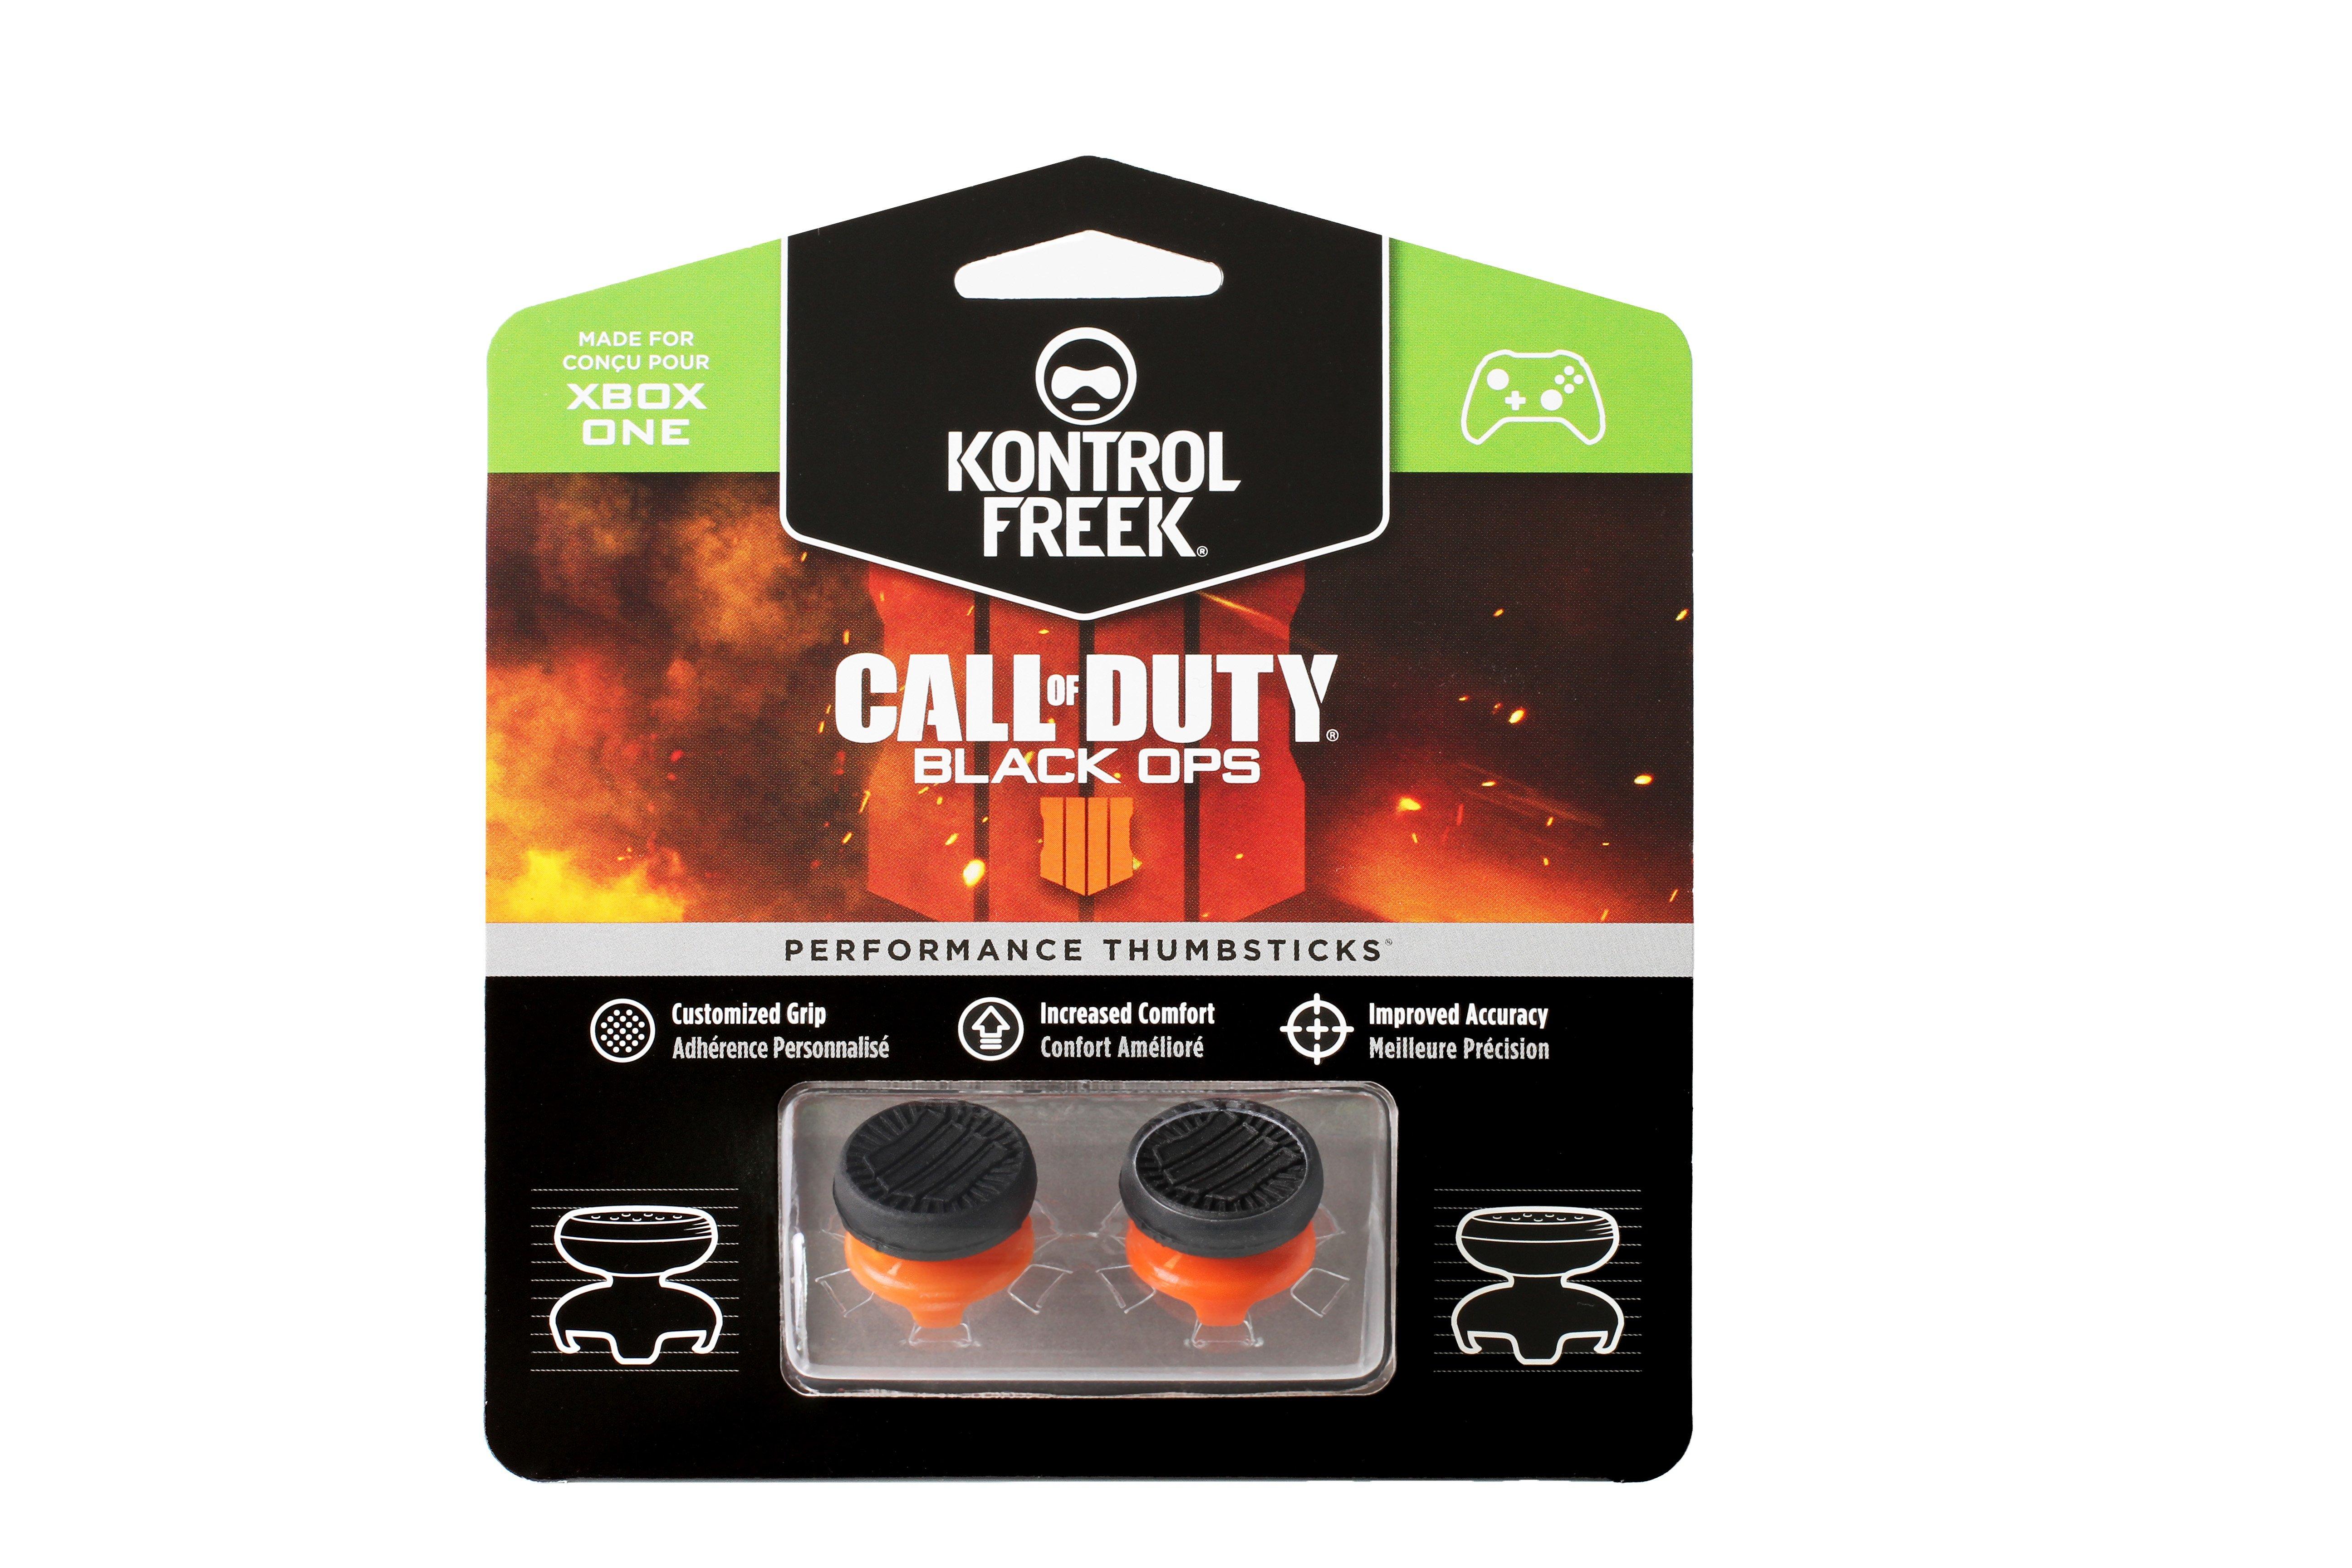 call of duty black ops xbox one gamestop